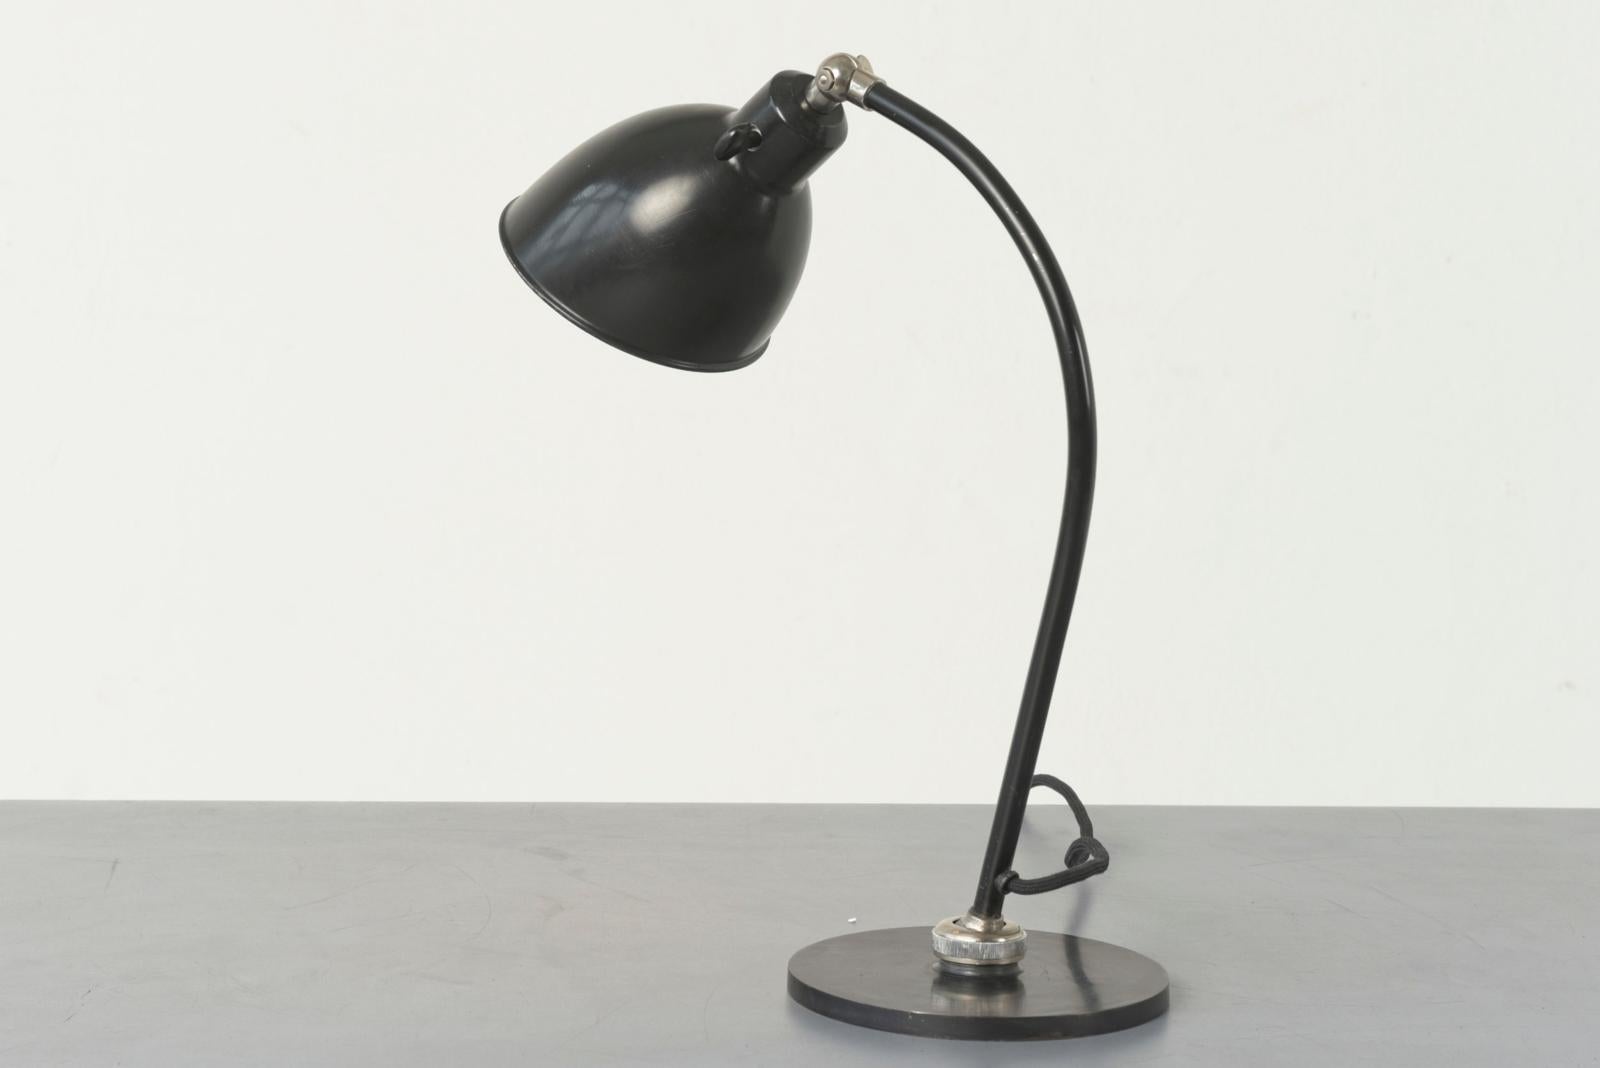 Mid-20th Century Table Lamp Polo-Populär by Christian Dell for Bünte + Remmler, Germany - 1930 For Sale